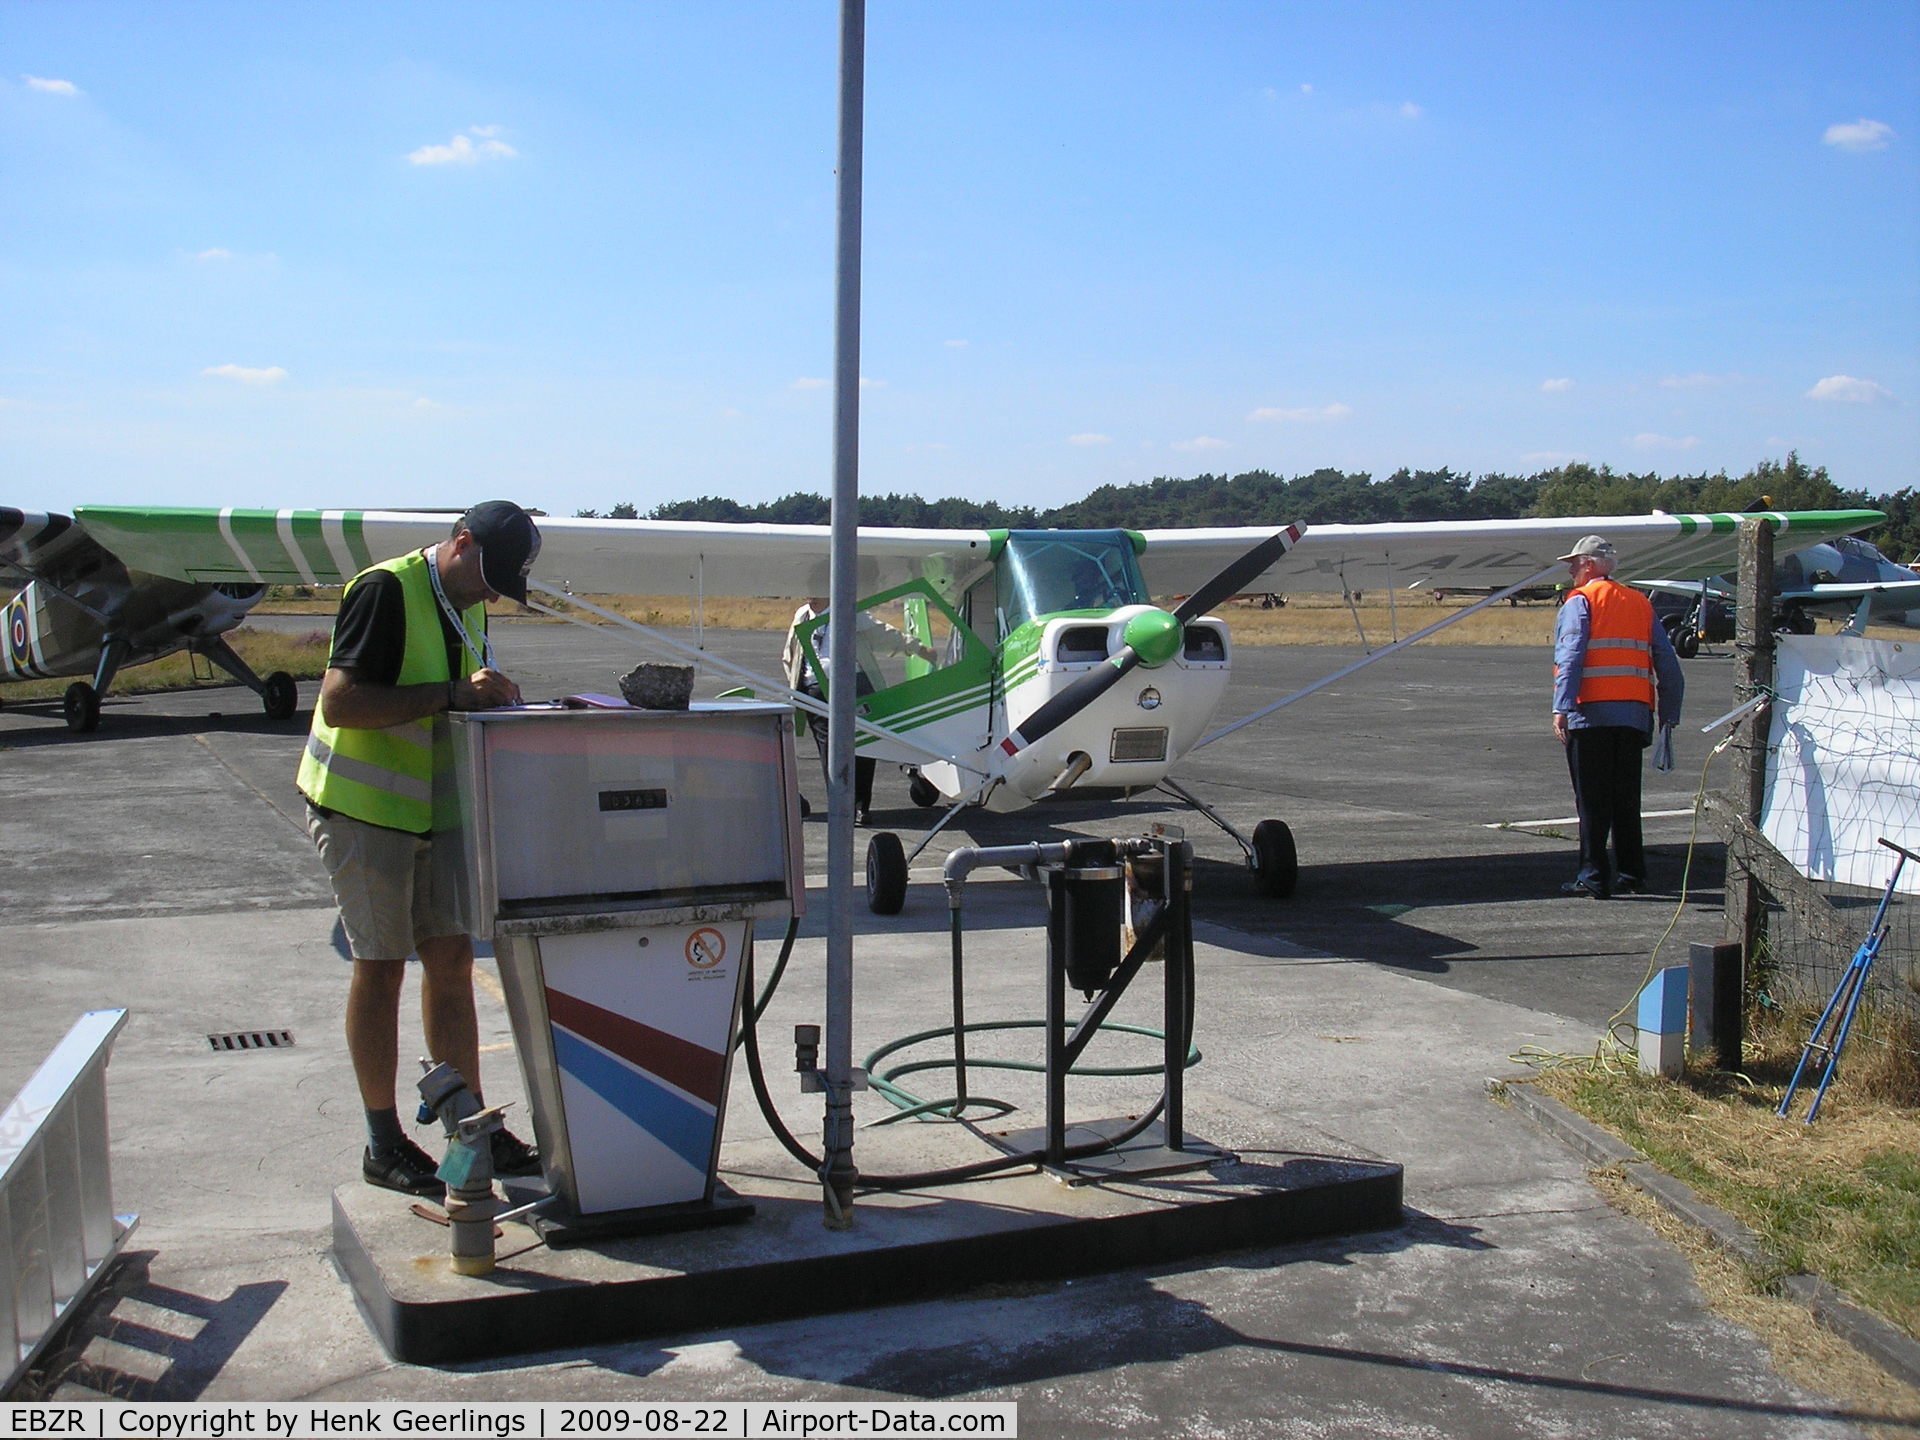 Oostmalle AB Airport, Zoersel Belgium (EBZR) - Fuel pump ; Fly In Malle Airport , 22 Aug 2009